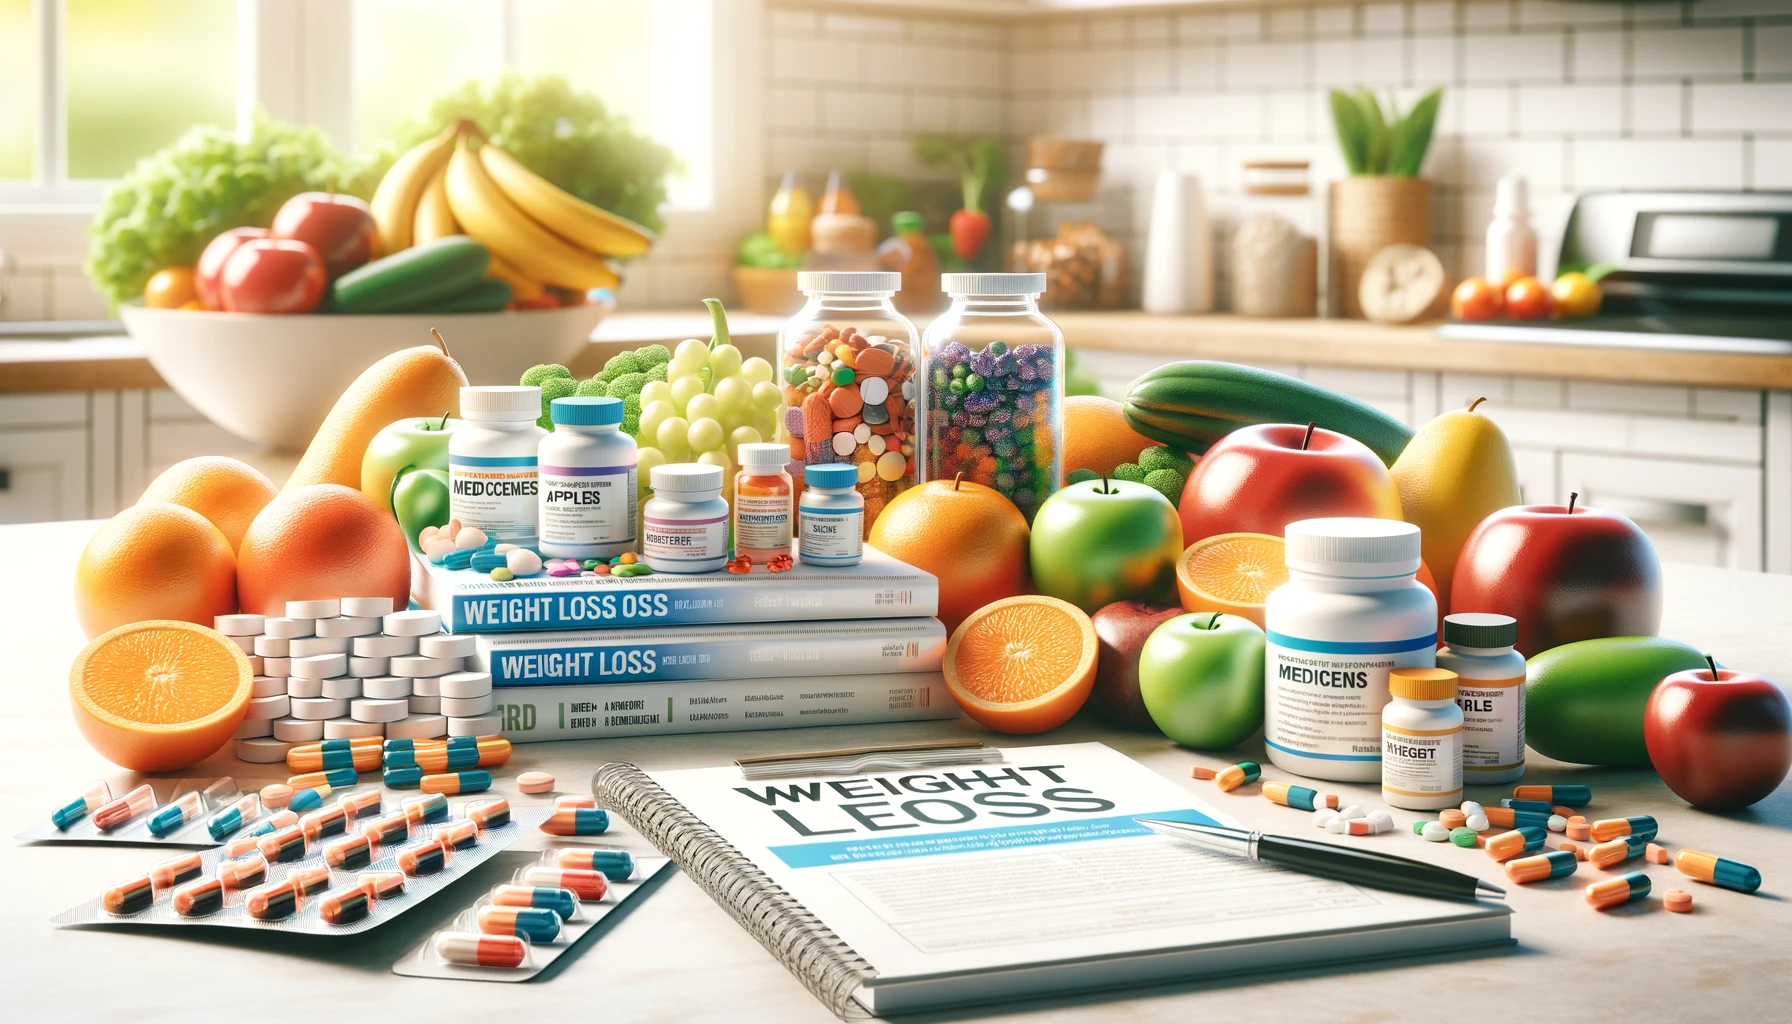 Various weight loss medications and a healthy lifestyle guidebook, symbolizing a balanced approach to weight loss.